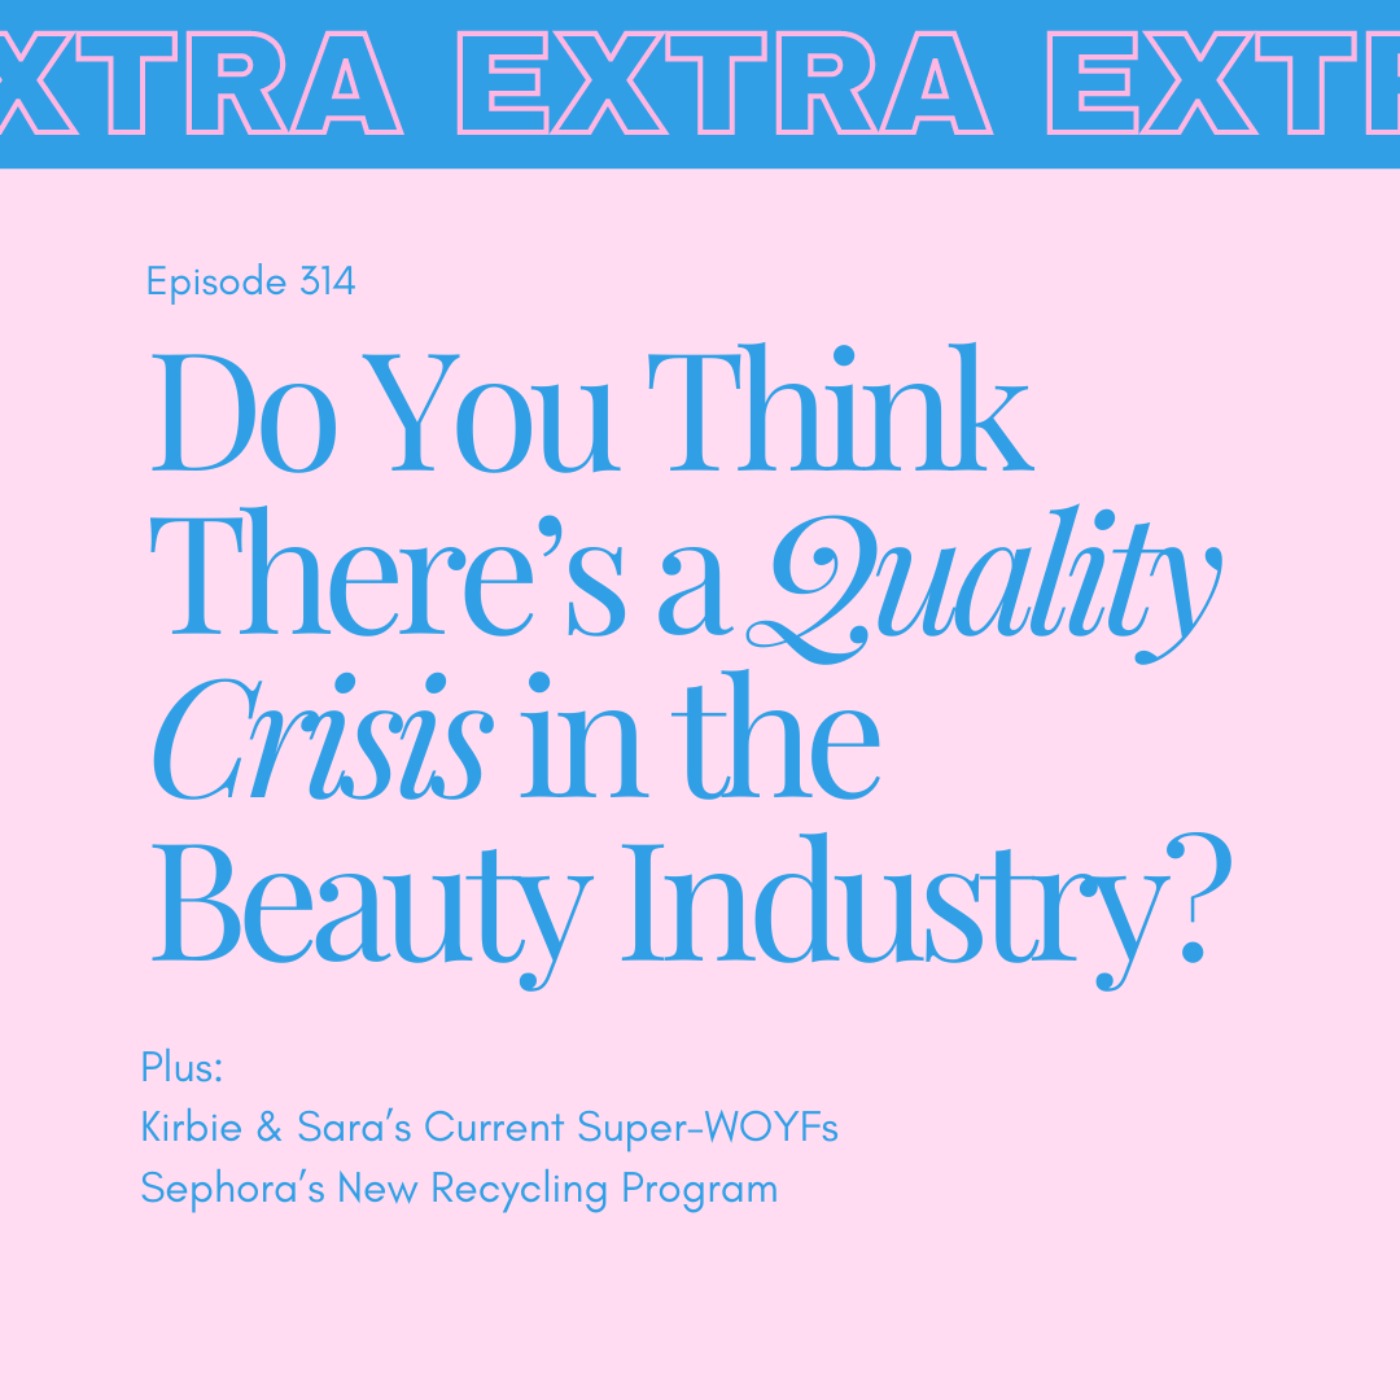 Do You Think There's a Quality Crisis in the Beauty Industry?